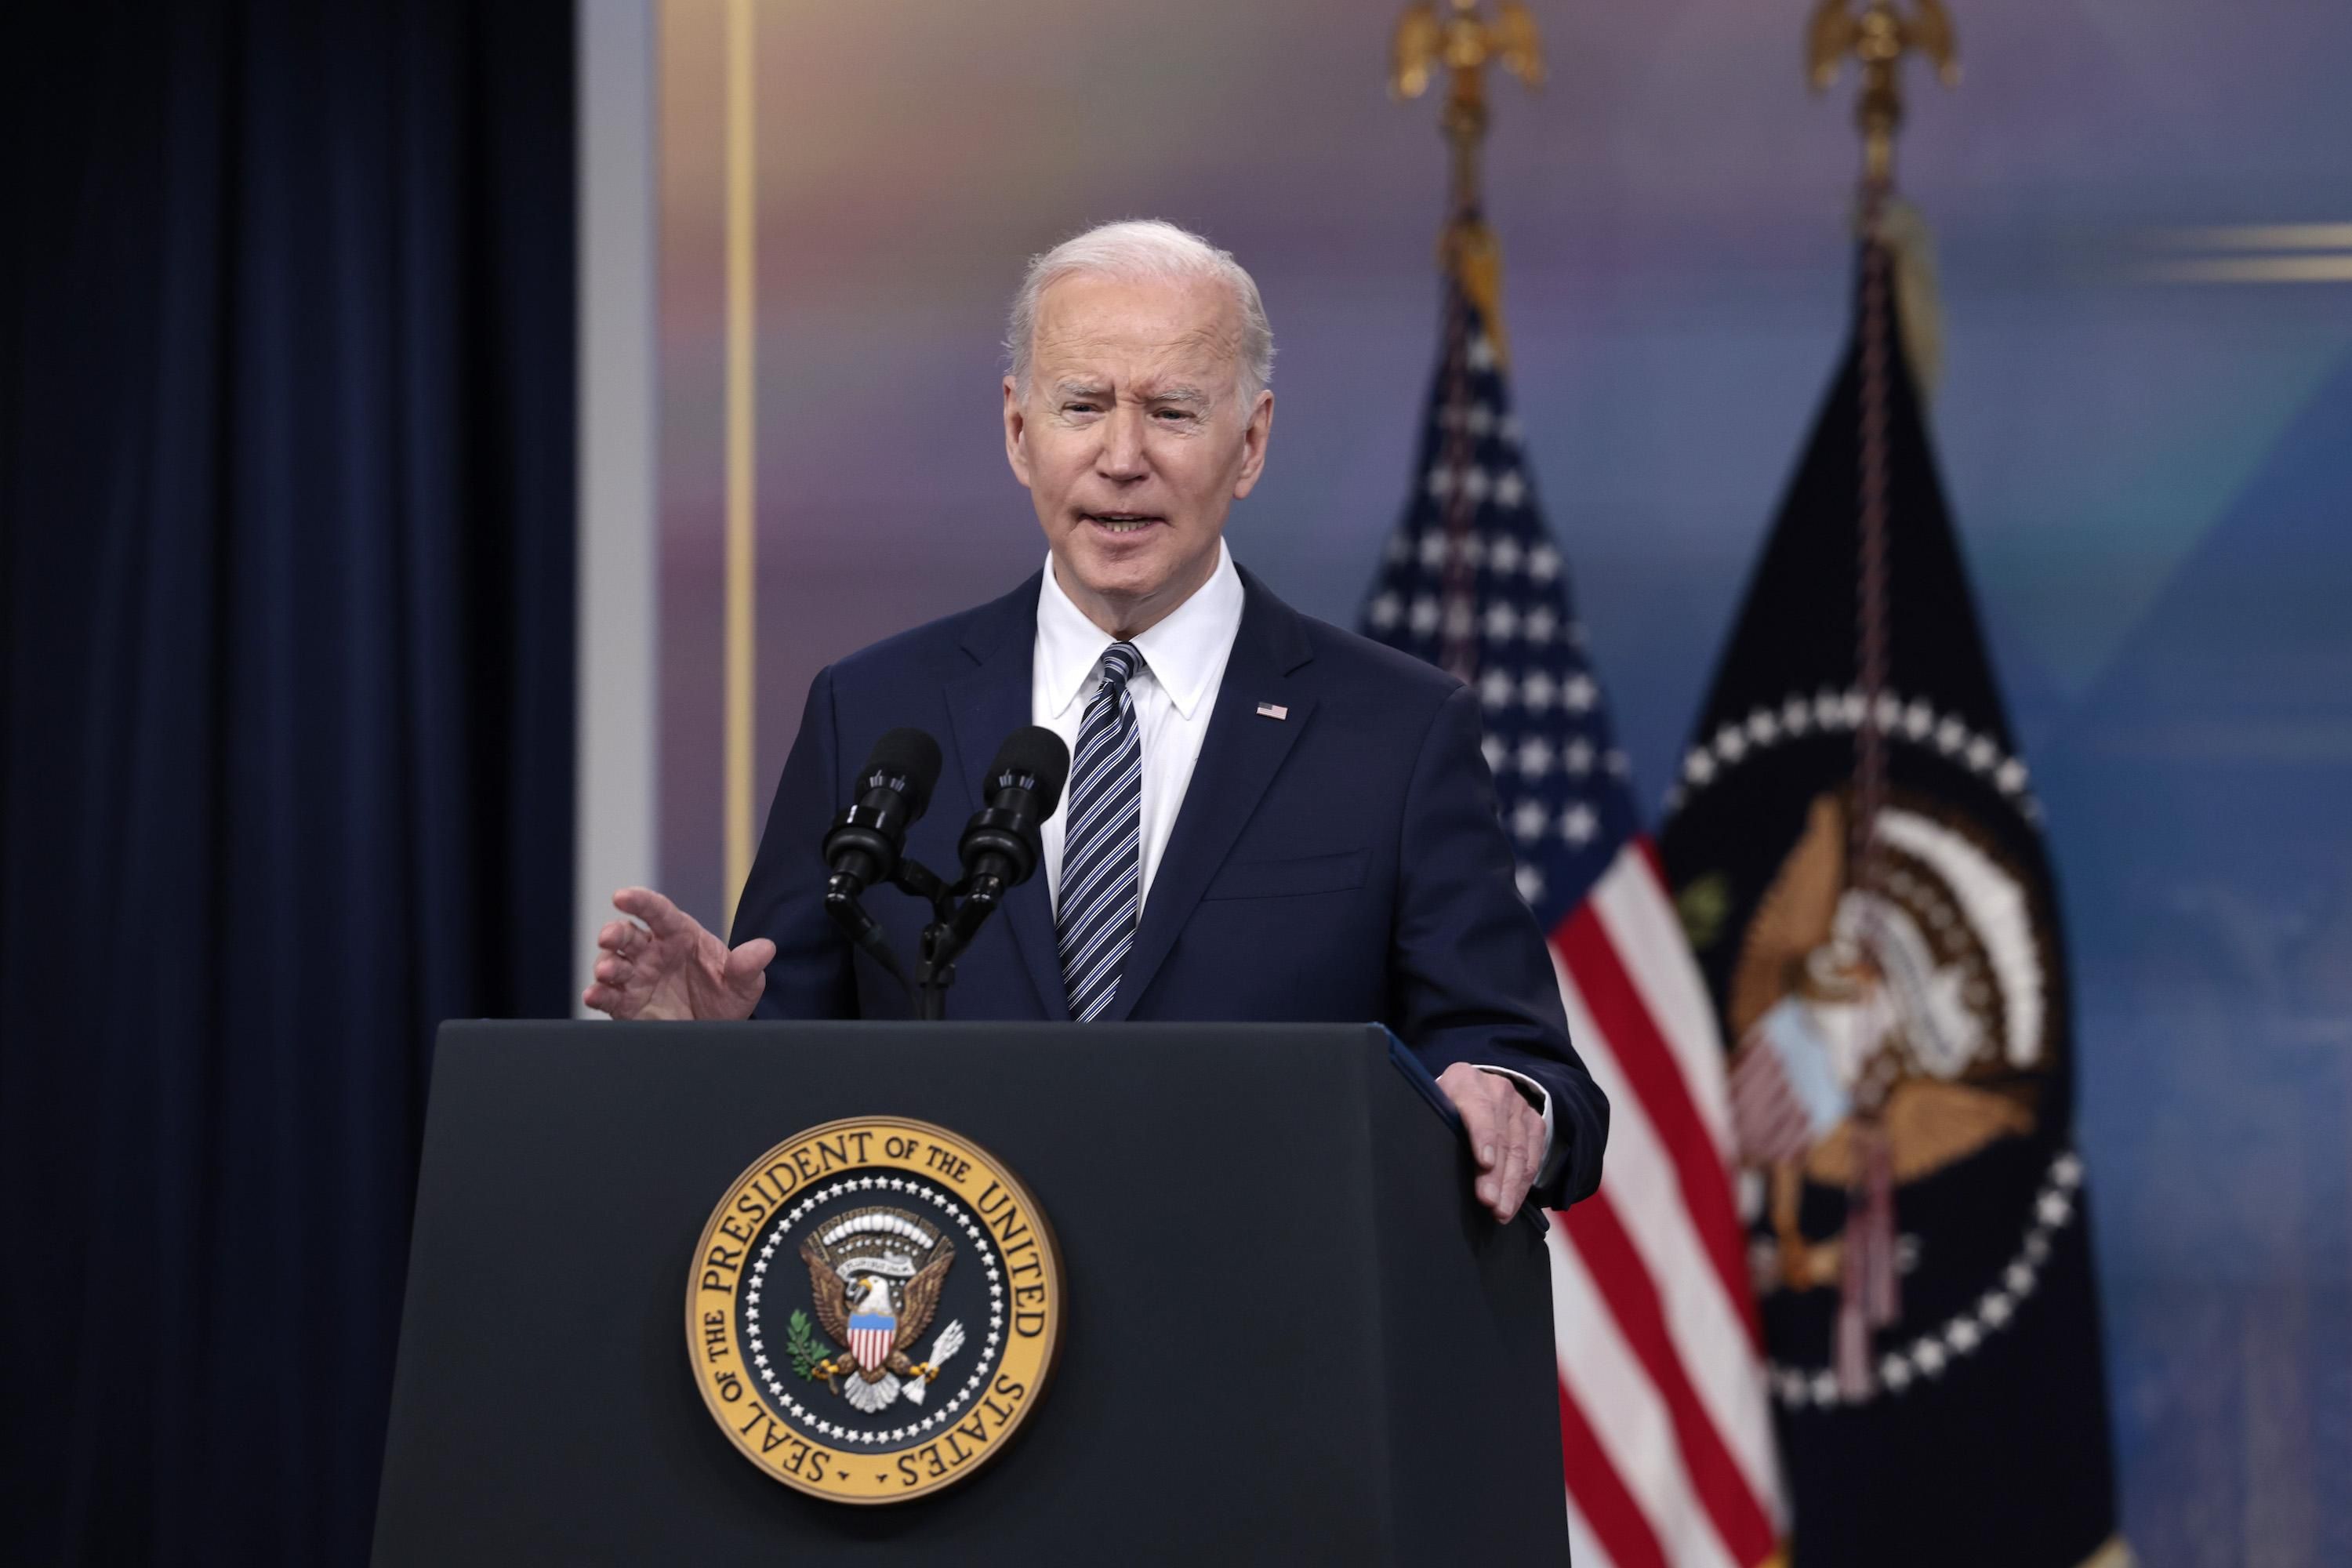 U.S. President Joe Biden delivers remarks on gas prices in the United States from the South Court Auditorium of the White House on March 31, 2022 in Washington, D.C.